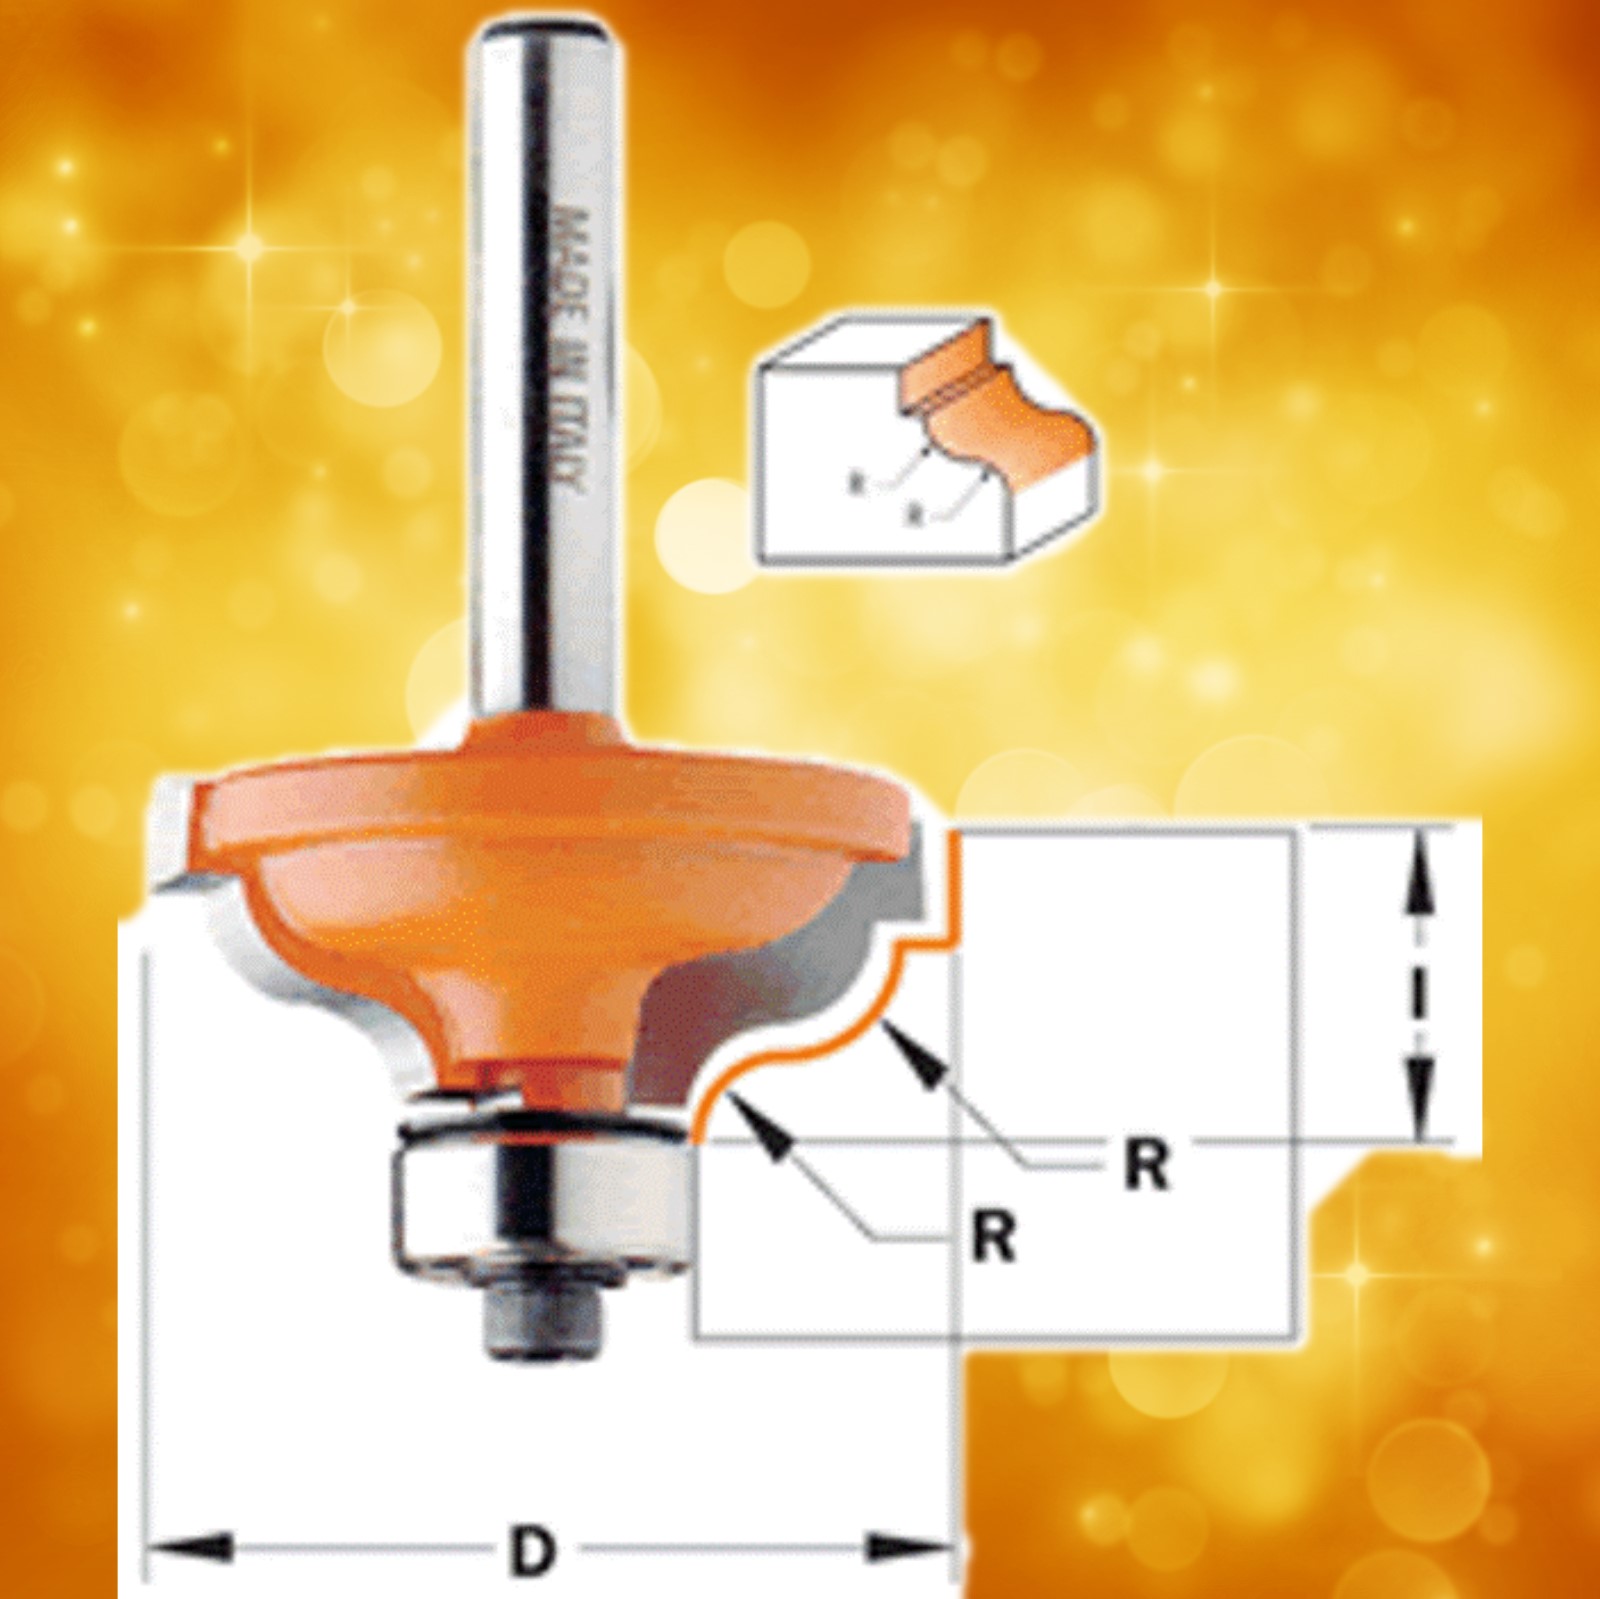 CMT Classical Ogee Router Bit 845.850.11 (Series 845) 1/4" - 3/16" radius, 1/2" shank